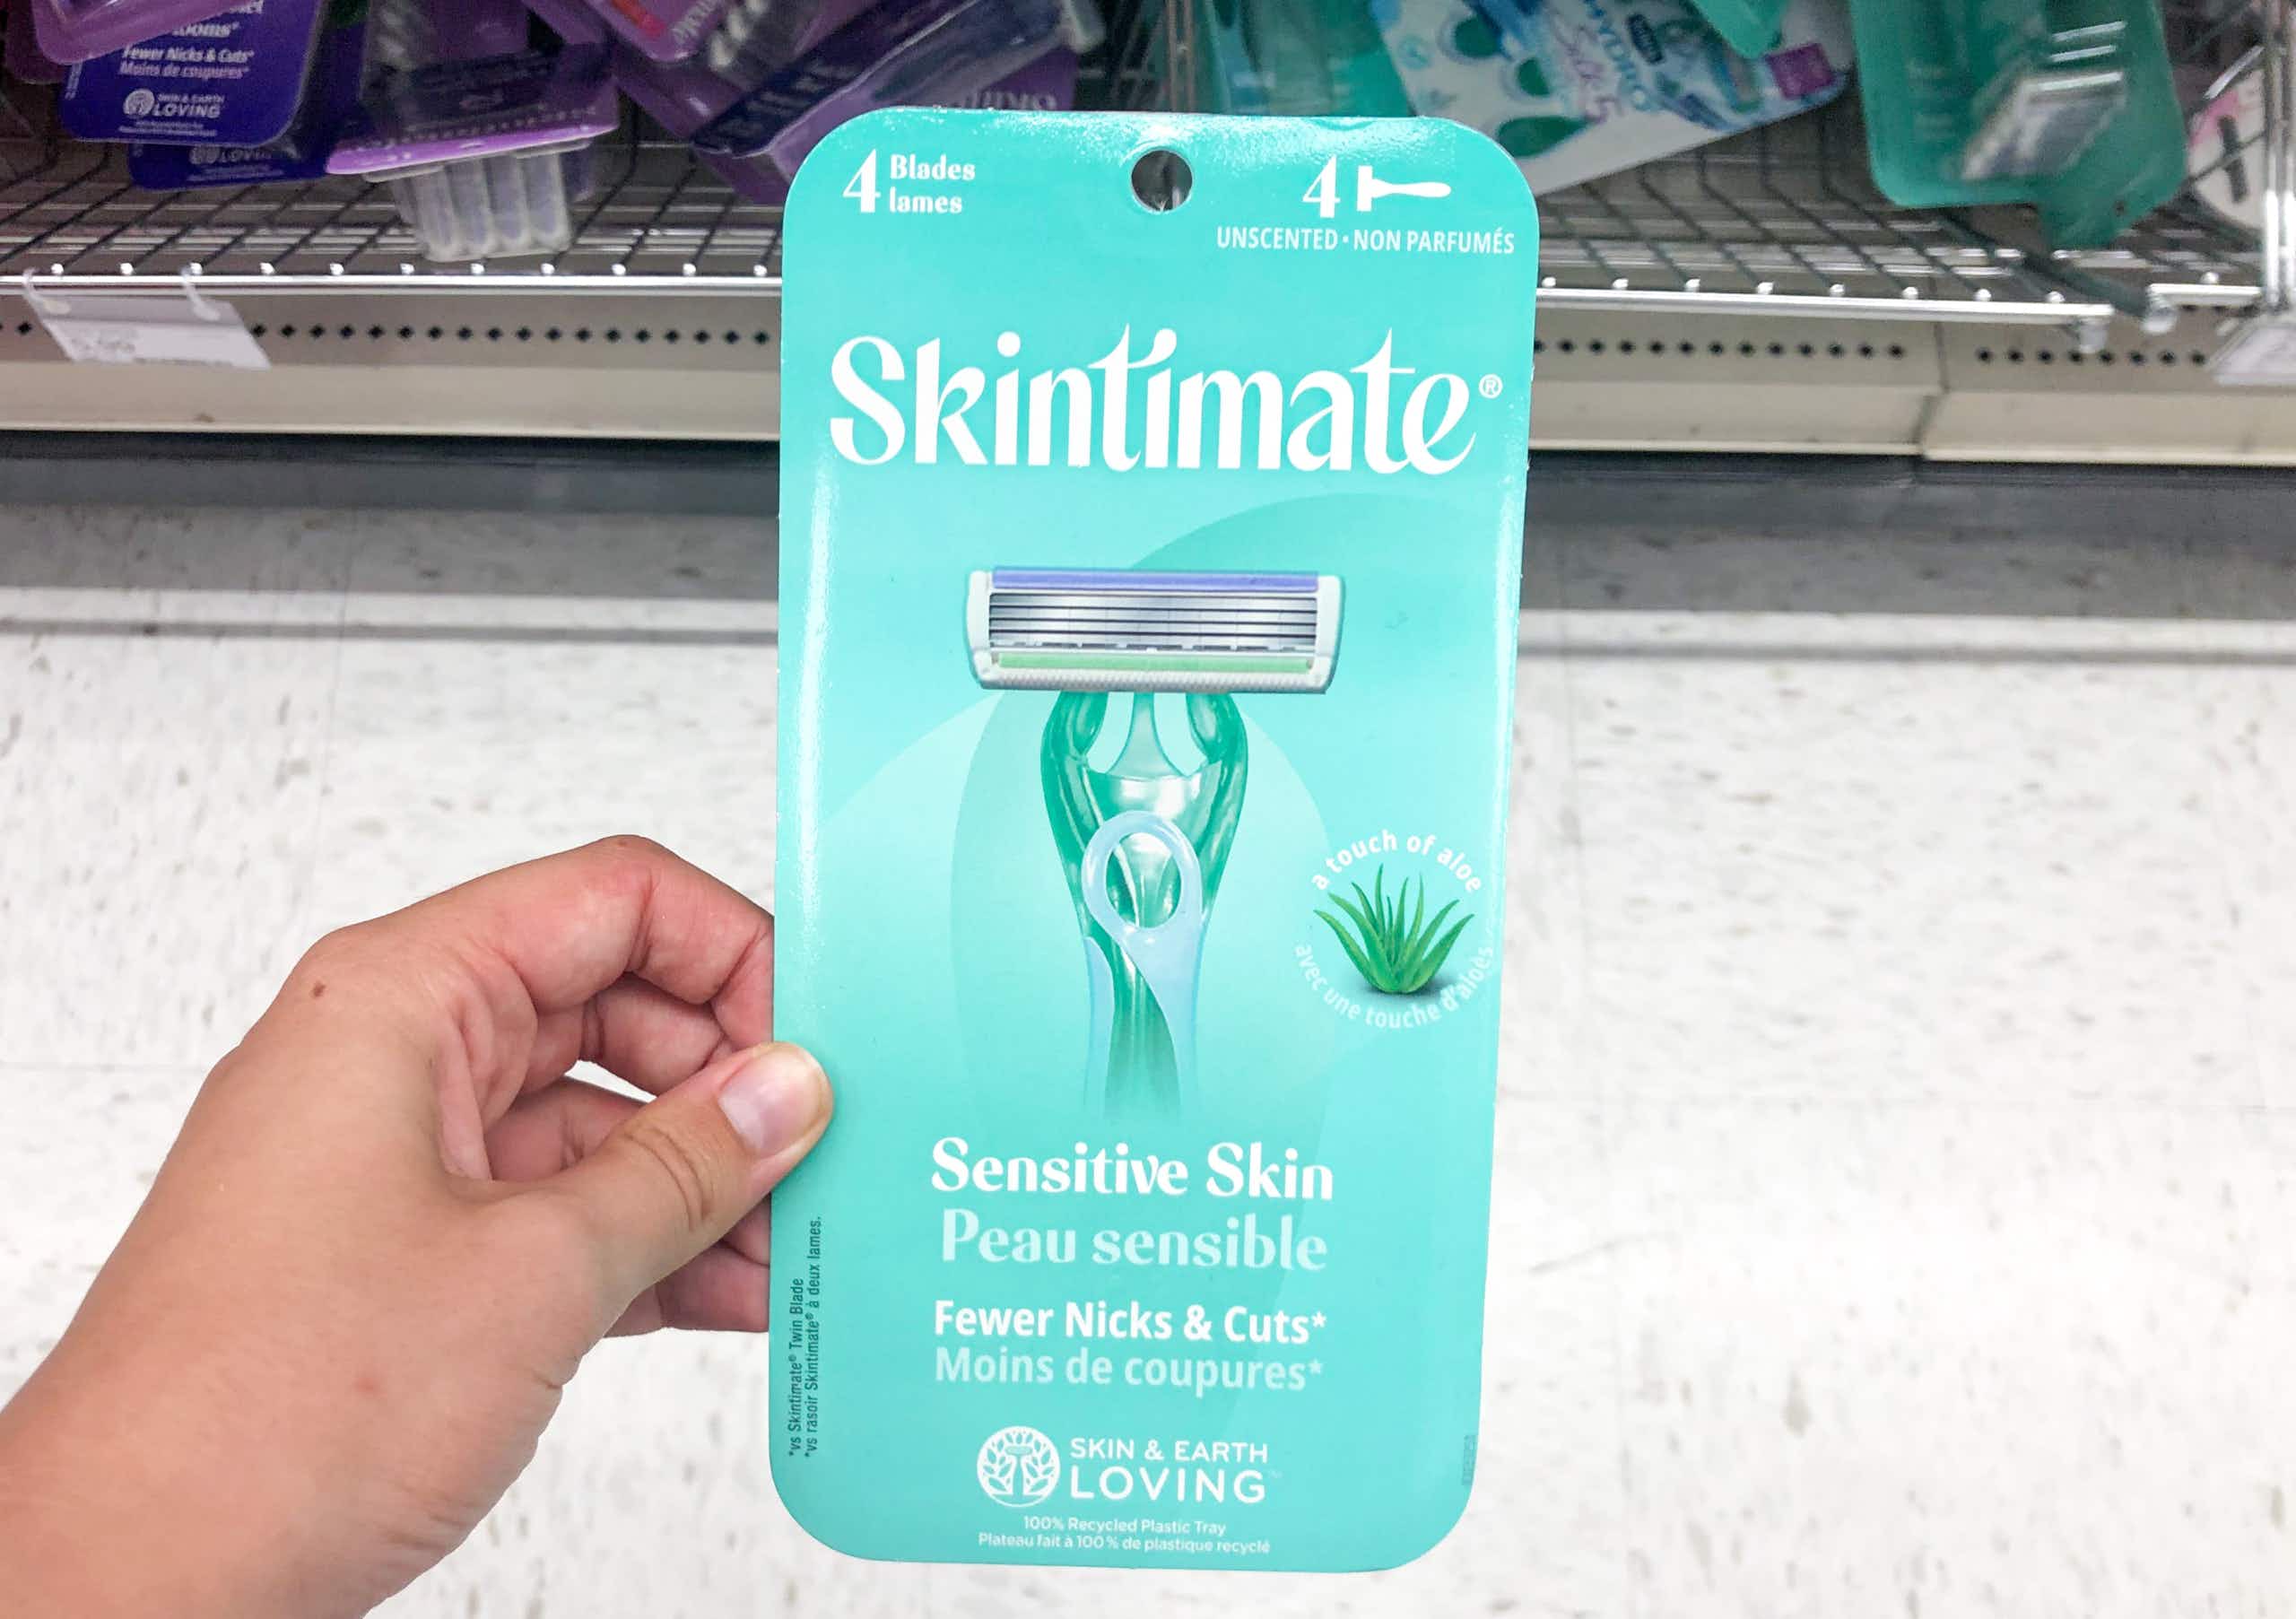 hand holding pack of disposable razors in front of store shelf